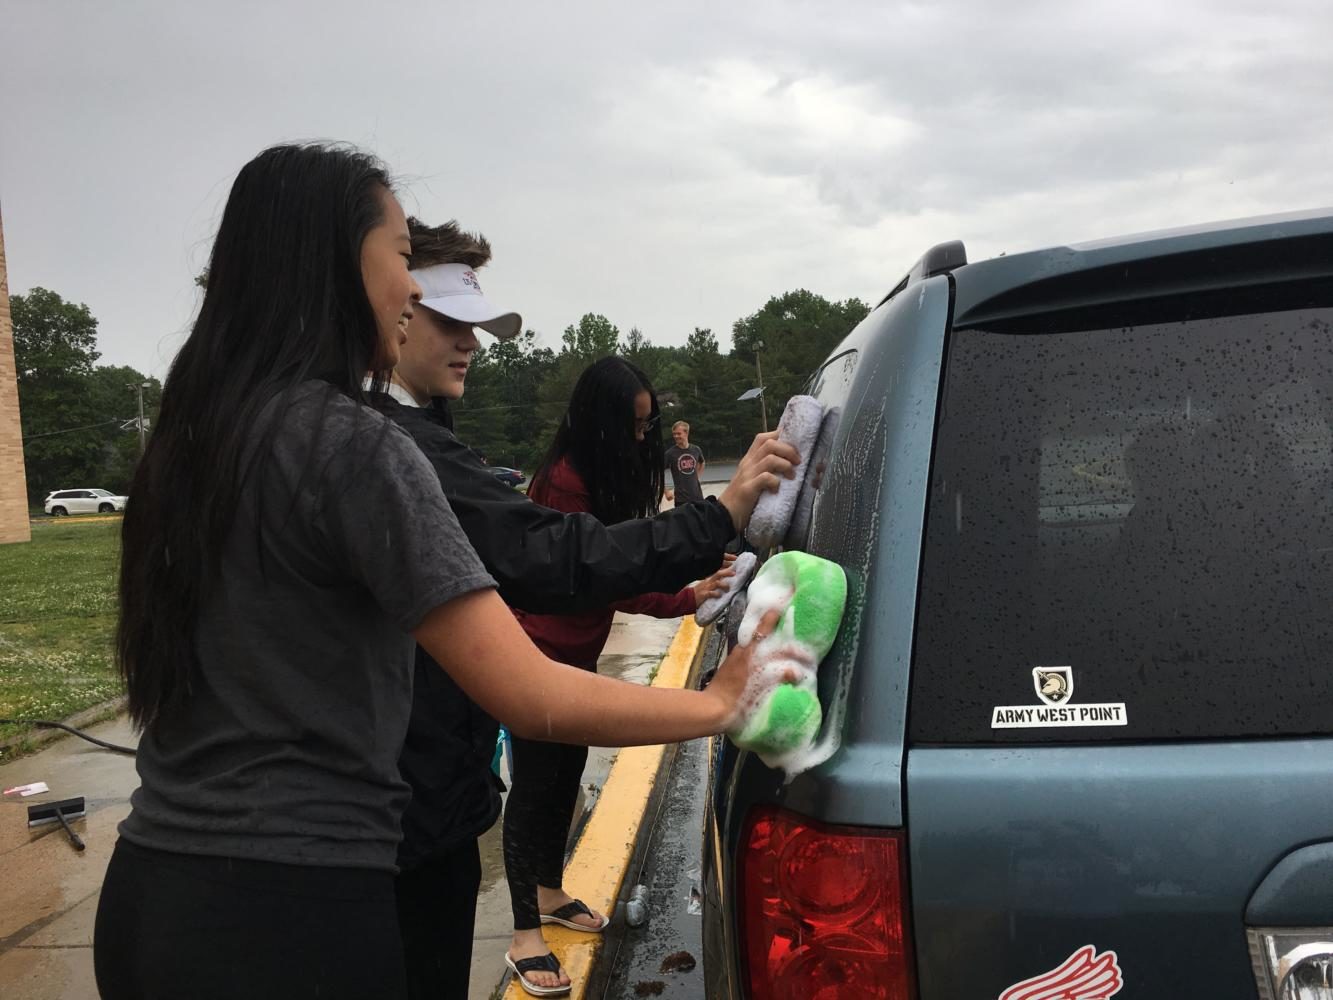 Class of 2020 organizes a car wash and bake sale to raise money